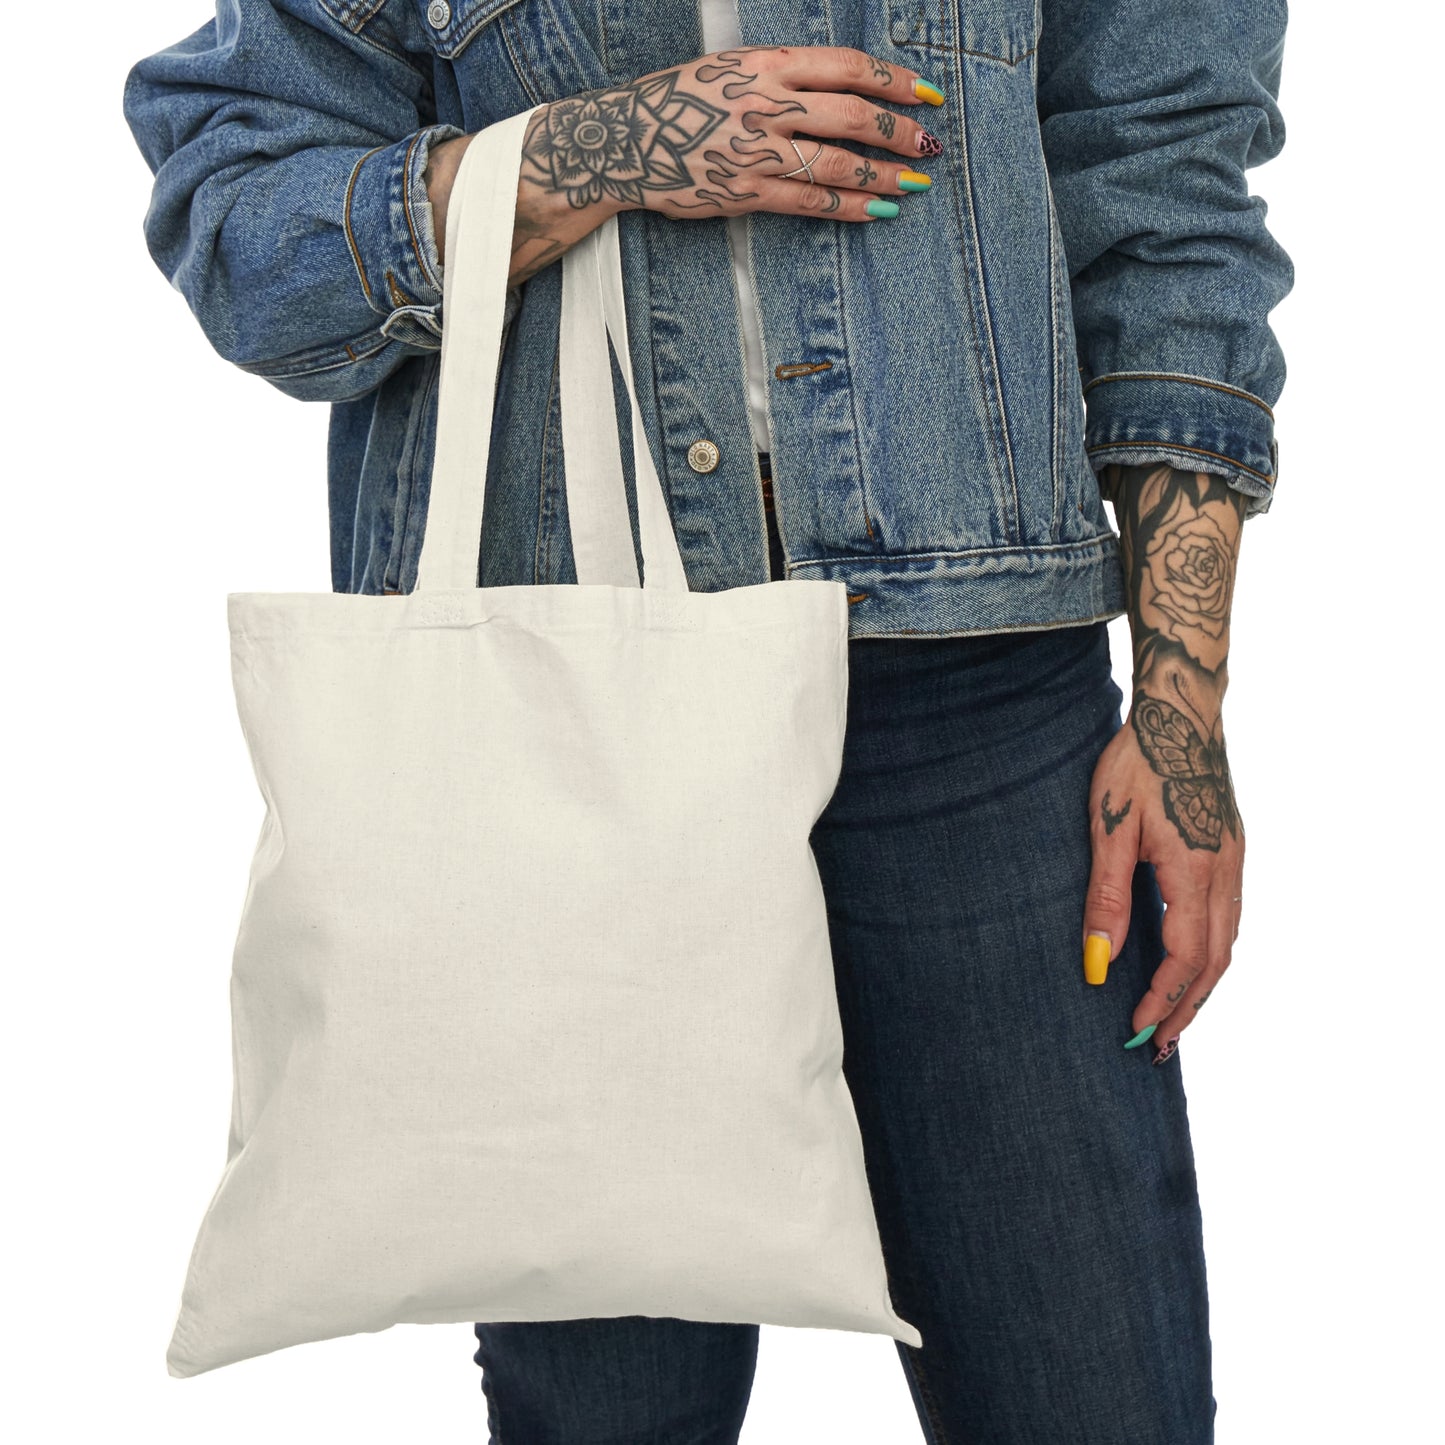 Murder In The Midst - Natural Tote Bag